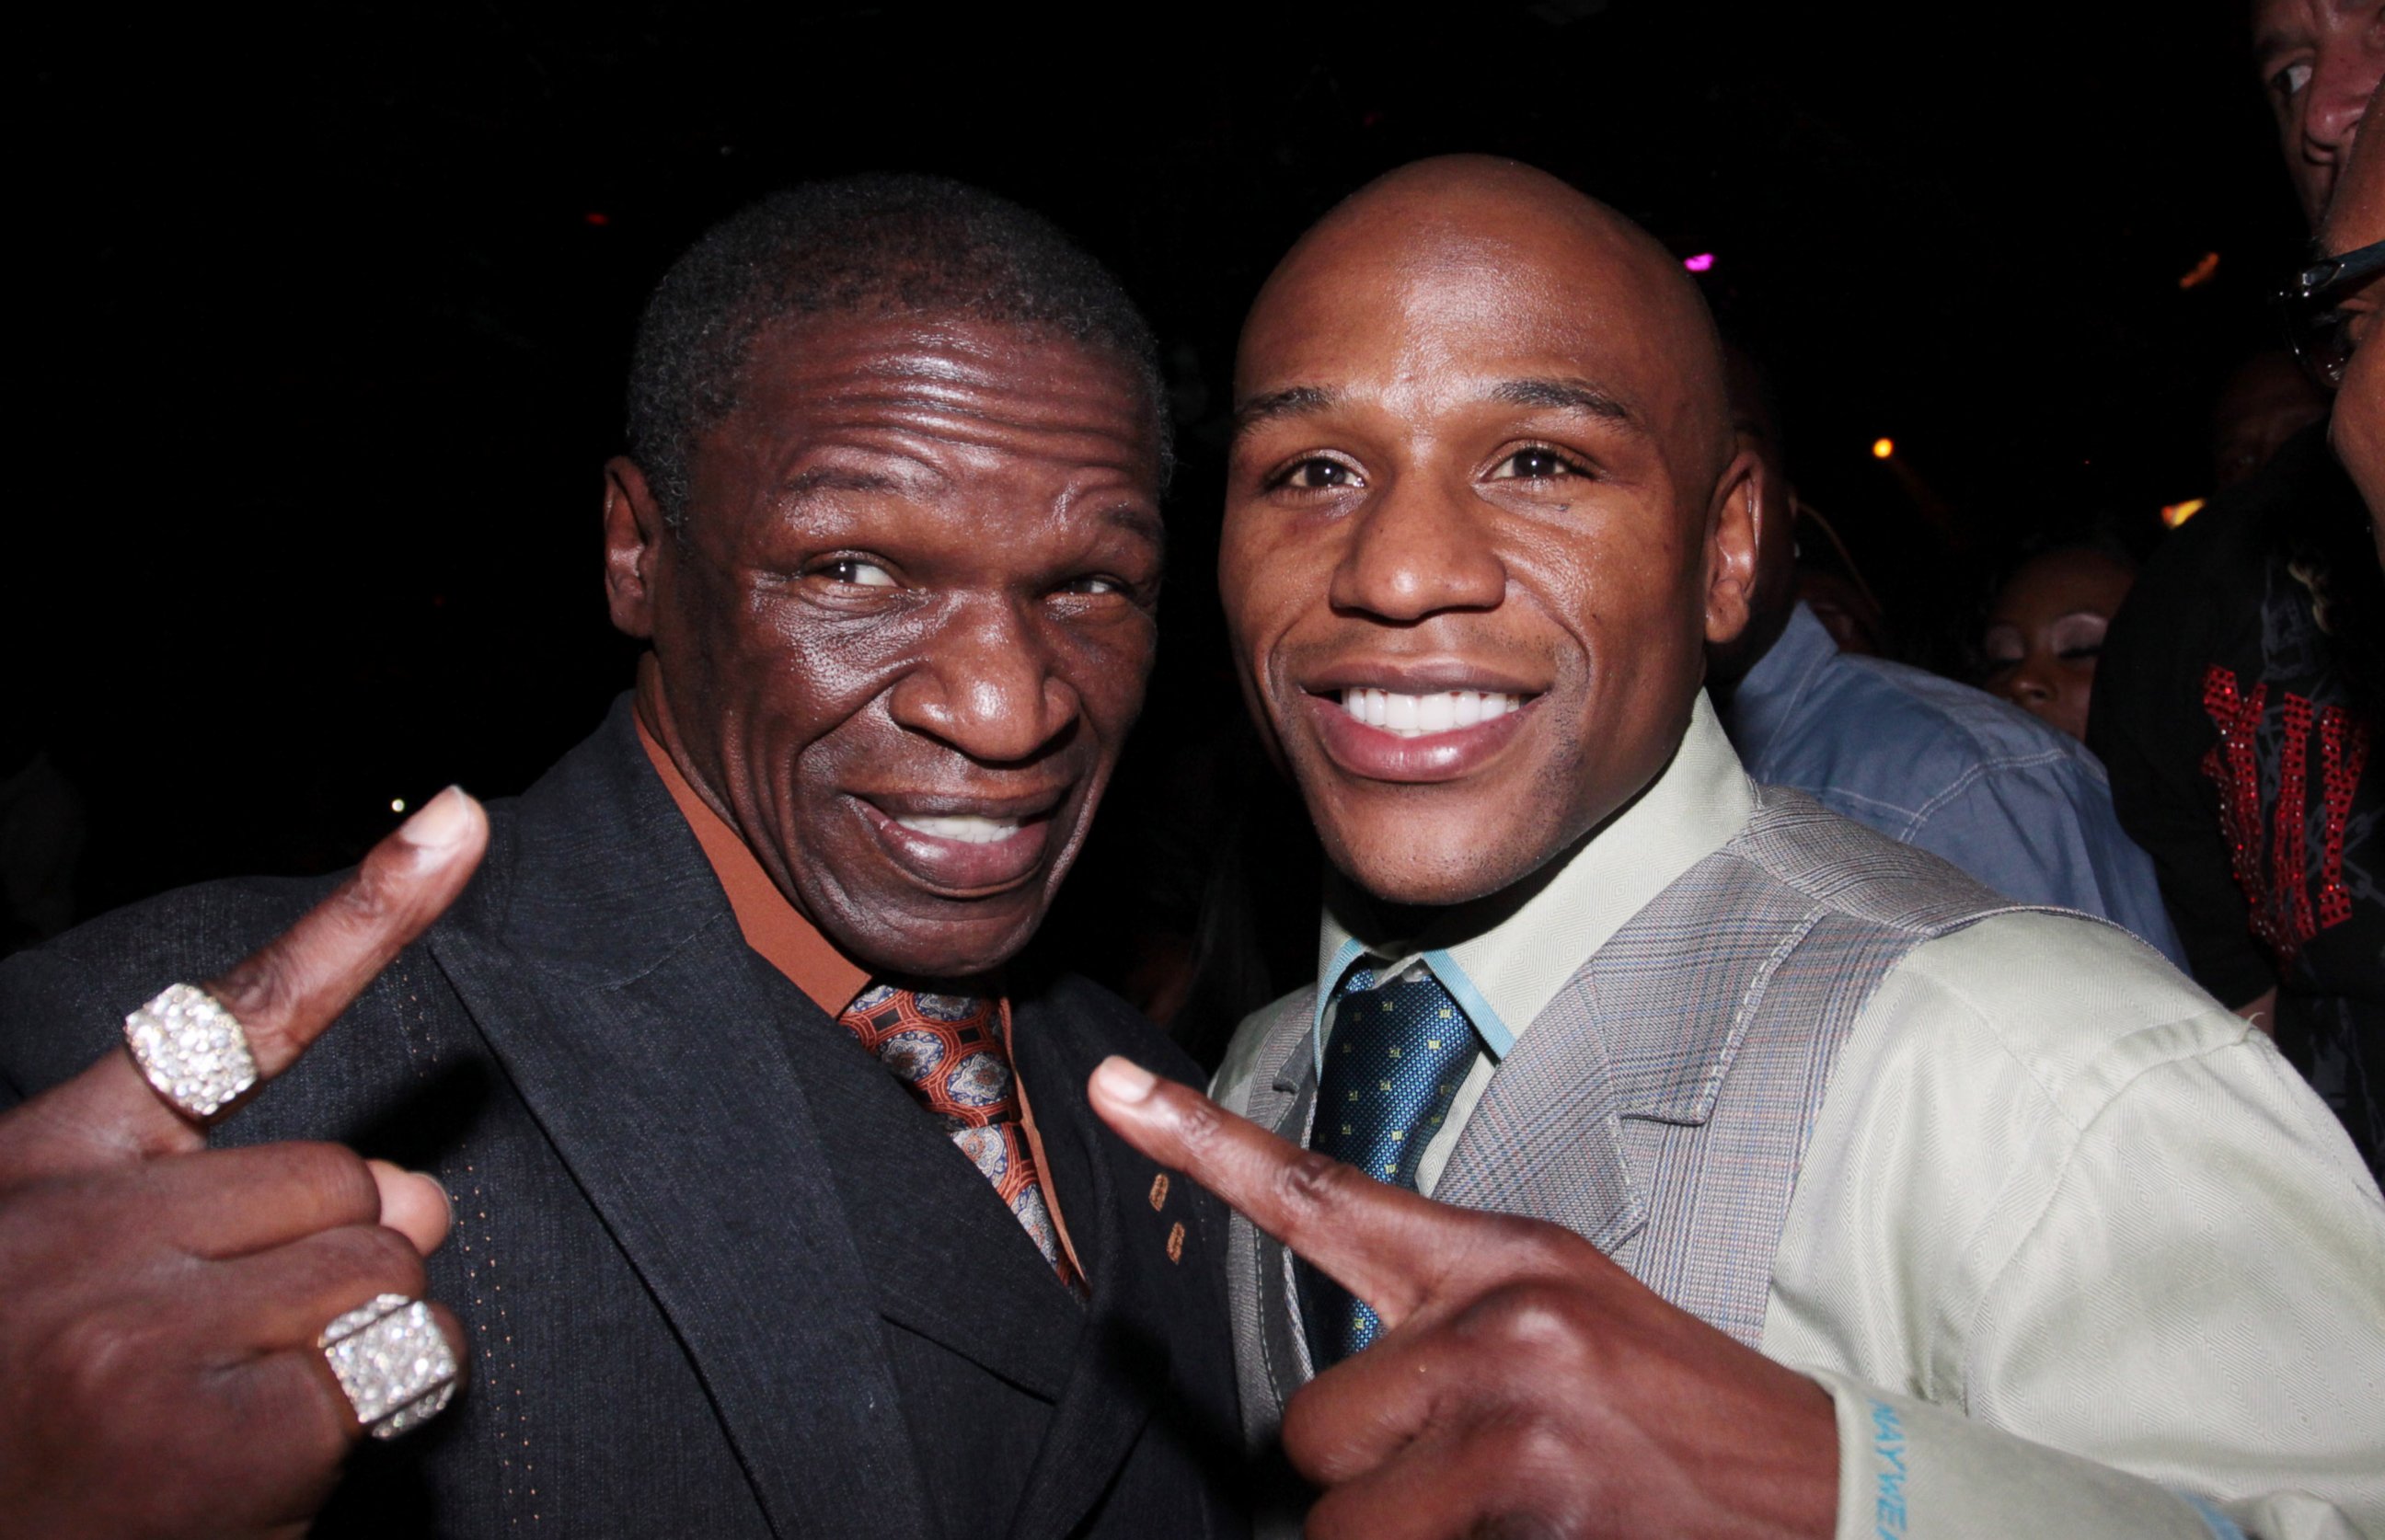 PHOTO: Floyd Mayweather, Sr. and Floyd Mayweather, Jr. attend the official Mayweather afterparty at Studio 54 at MGM Grand on May 1, 2010 in Las Vegas, Nevada.  